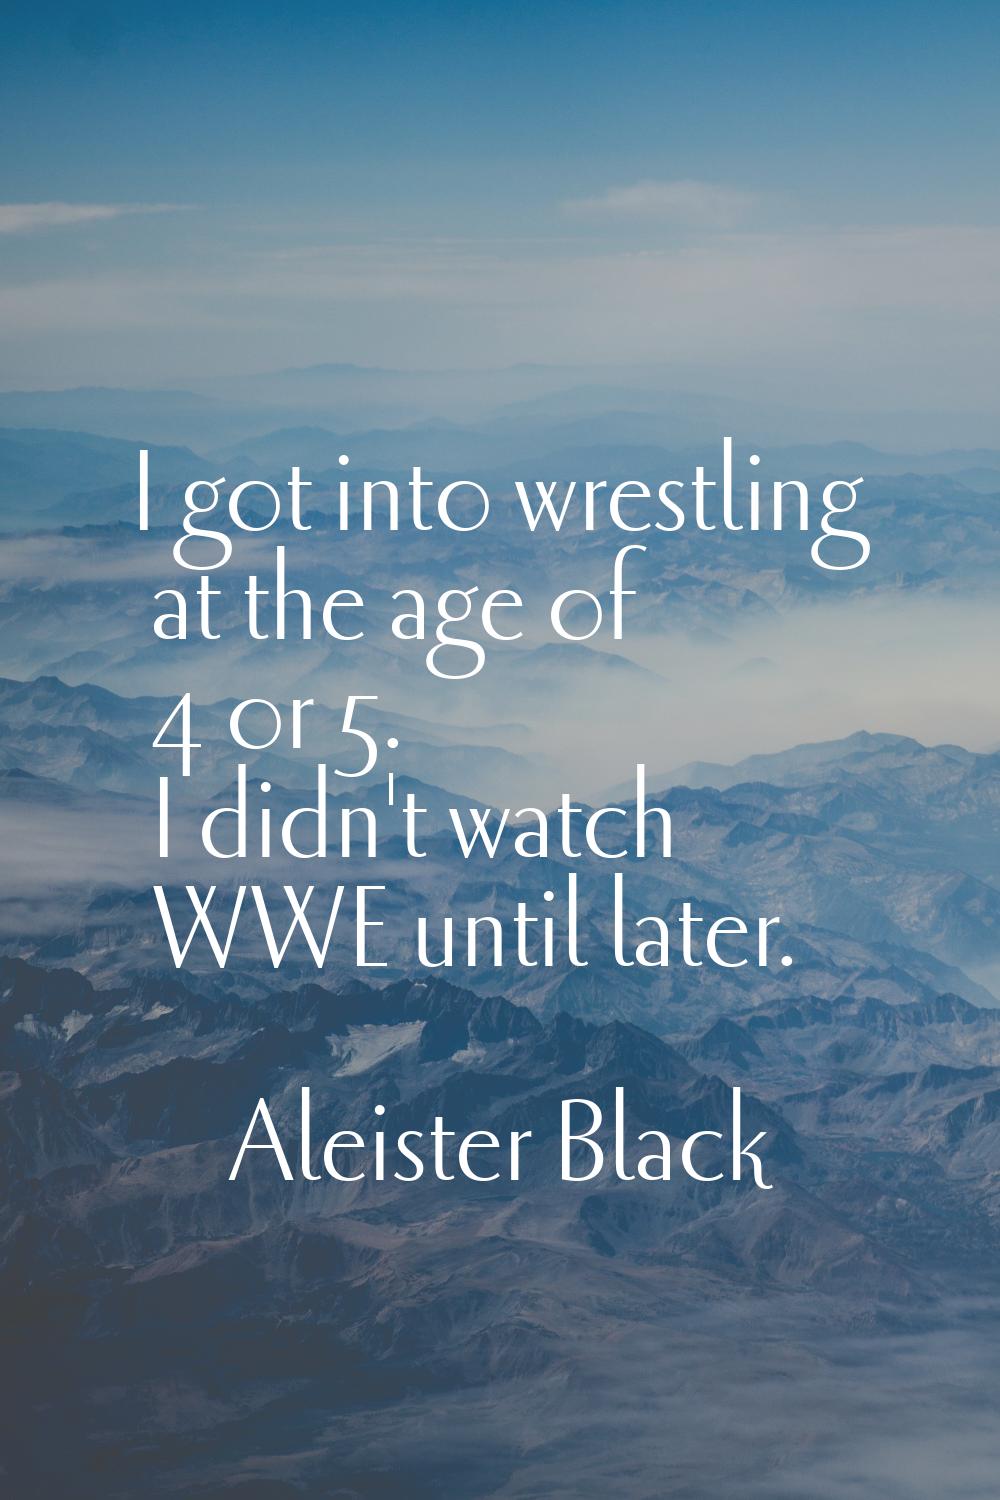 I got into wrestling at the age of 4 or 5. I didn't watch WWE until later.